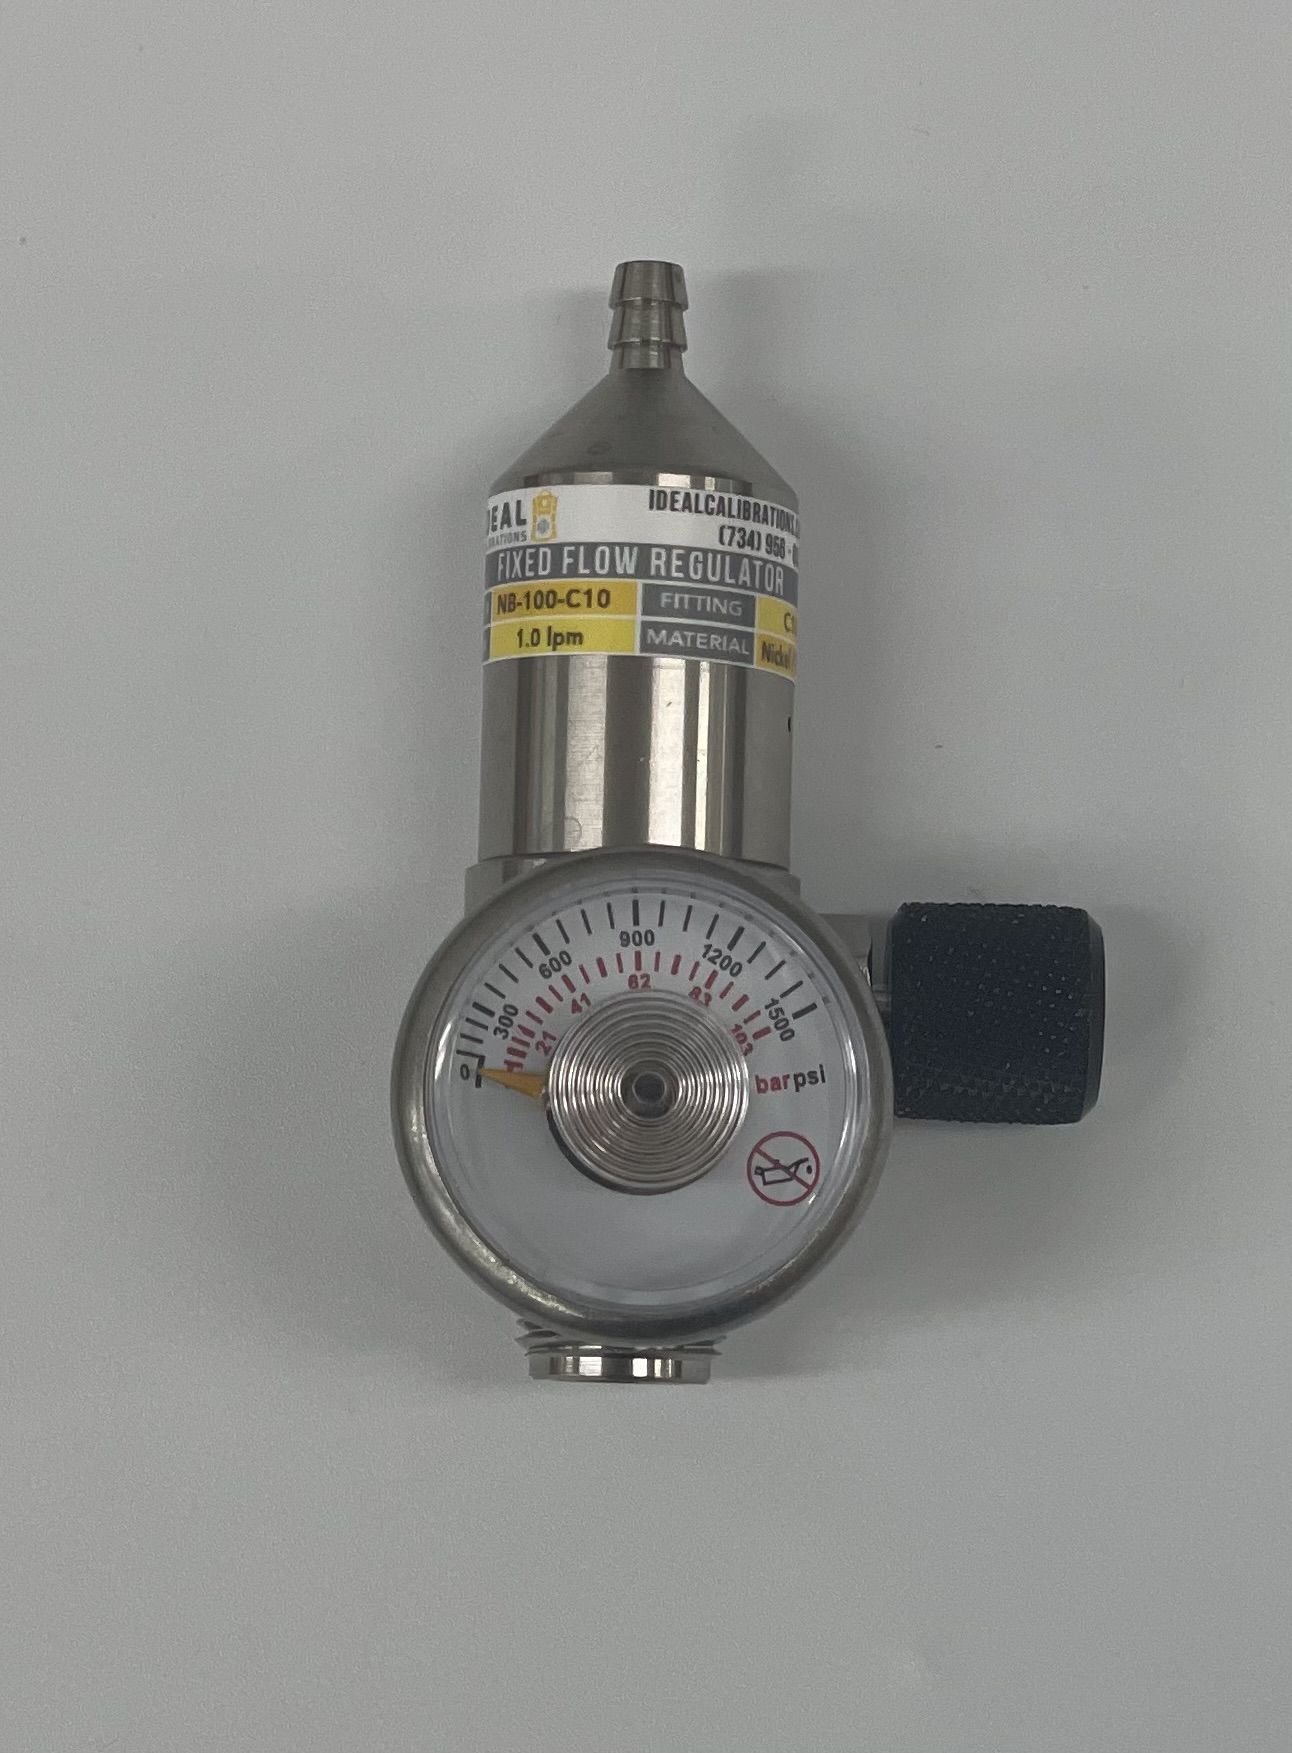 Hello! What is the outlet pressure of the gas with this regulator?